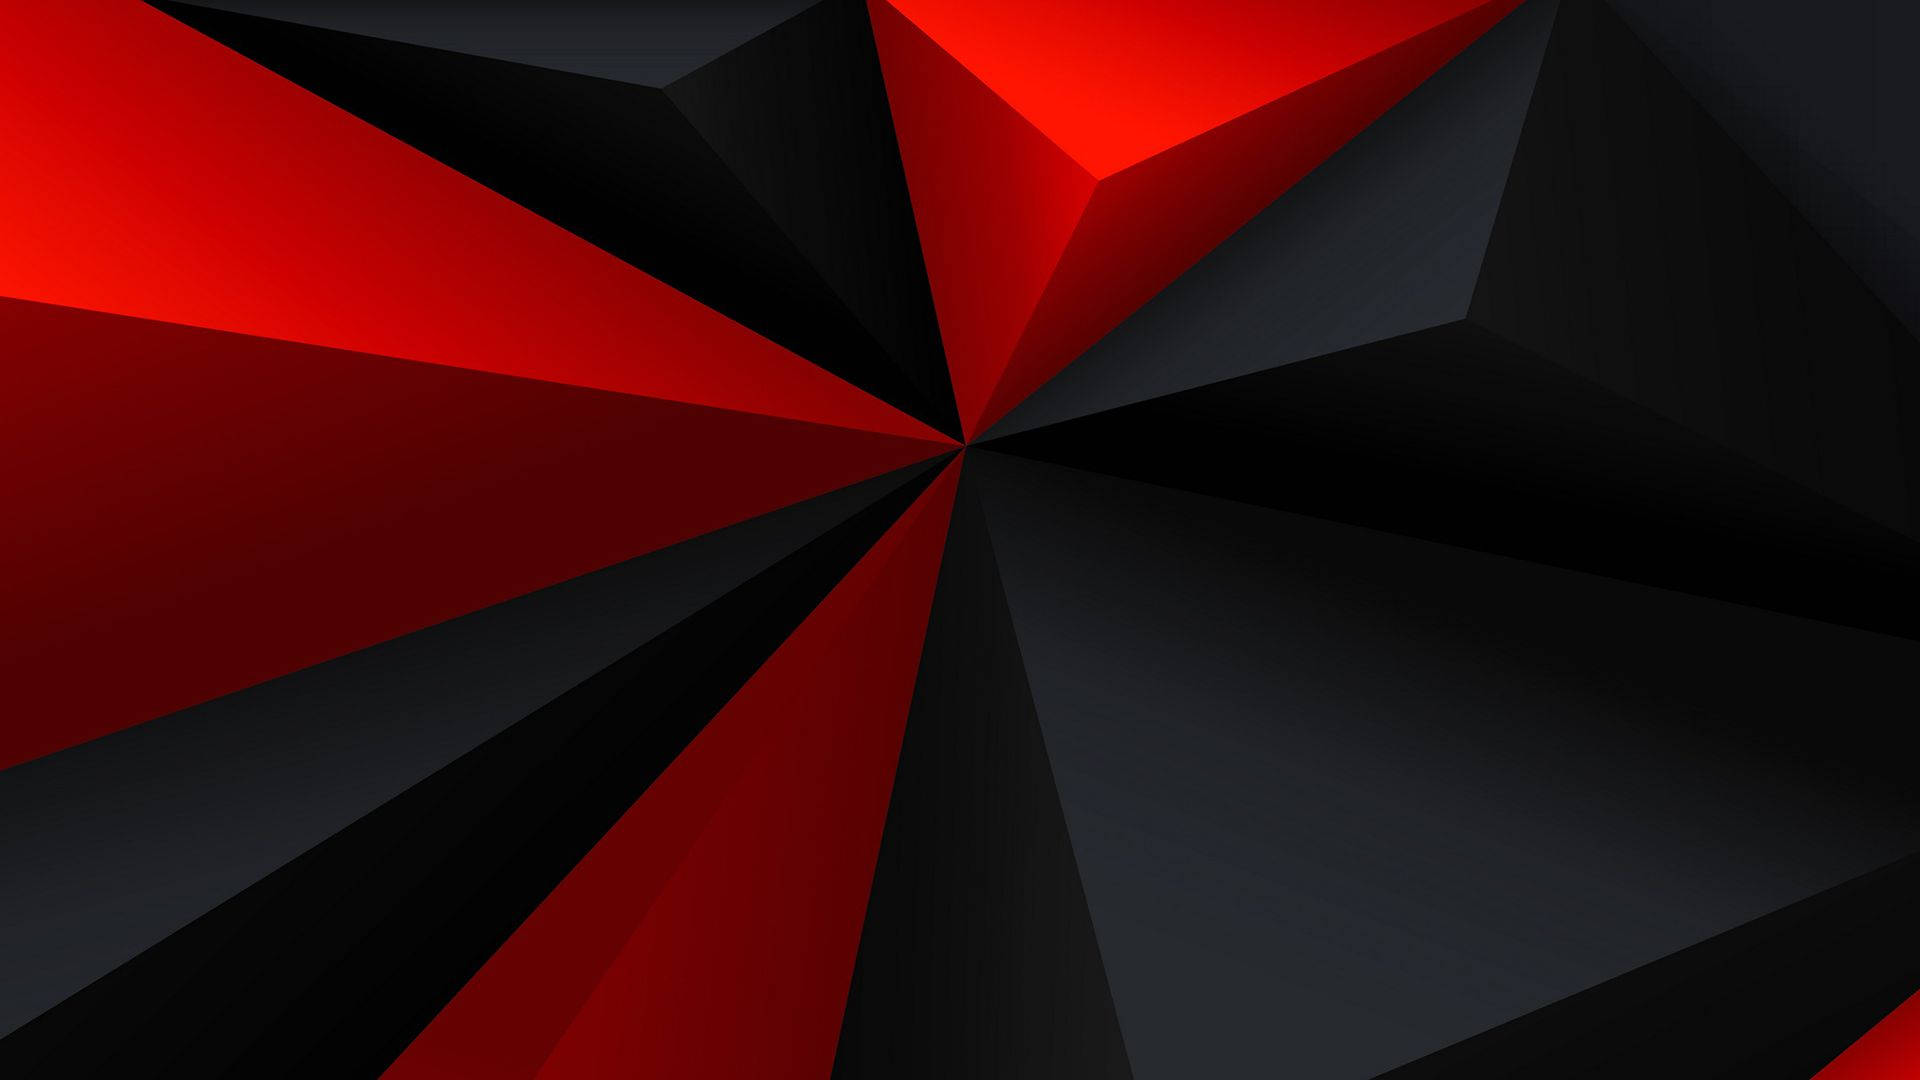 Free Red And Black Wallpaper Downloads, [500+] Red And Black Wallpapers for  FREE 